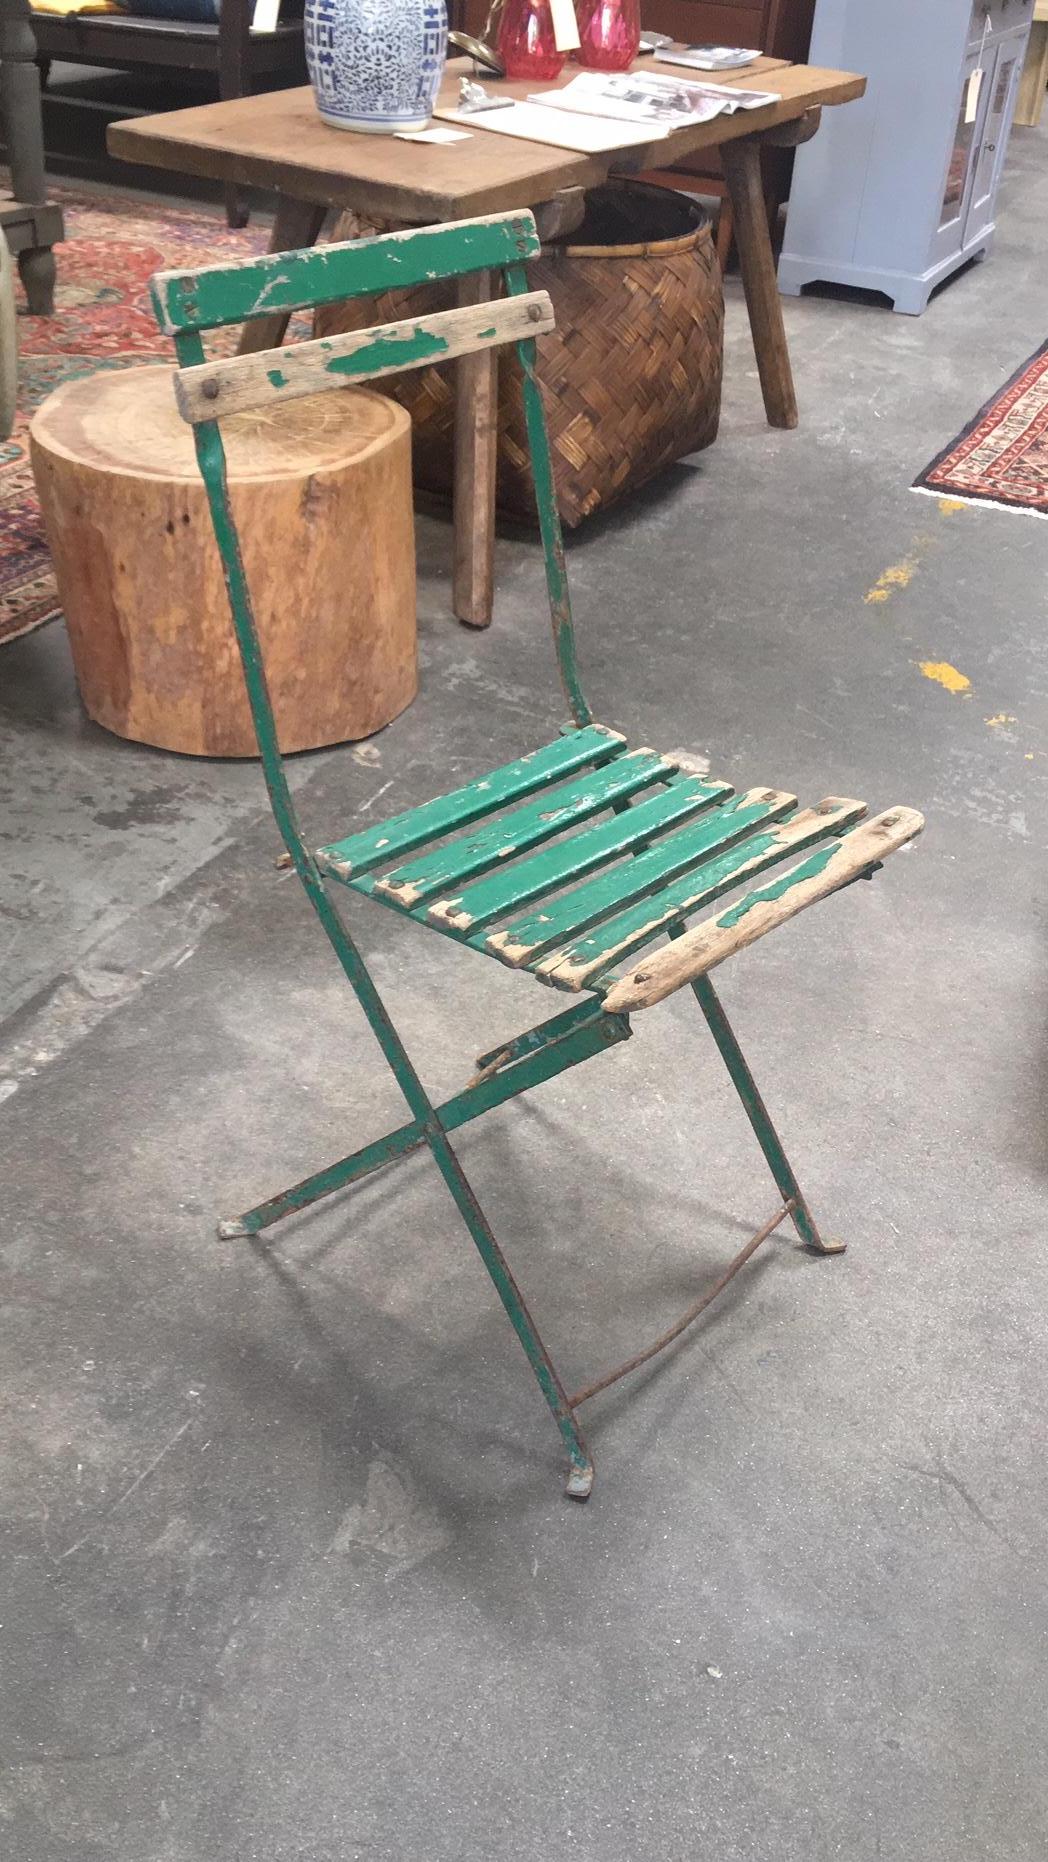 Vintage set of traditional French garden seats. From the 1950s. Made of wood and metal. Paint is chipping but that is typical with the age of these chairs.